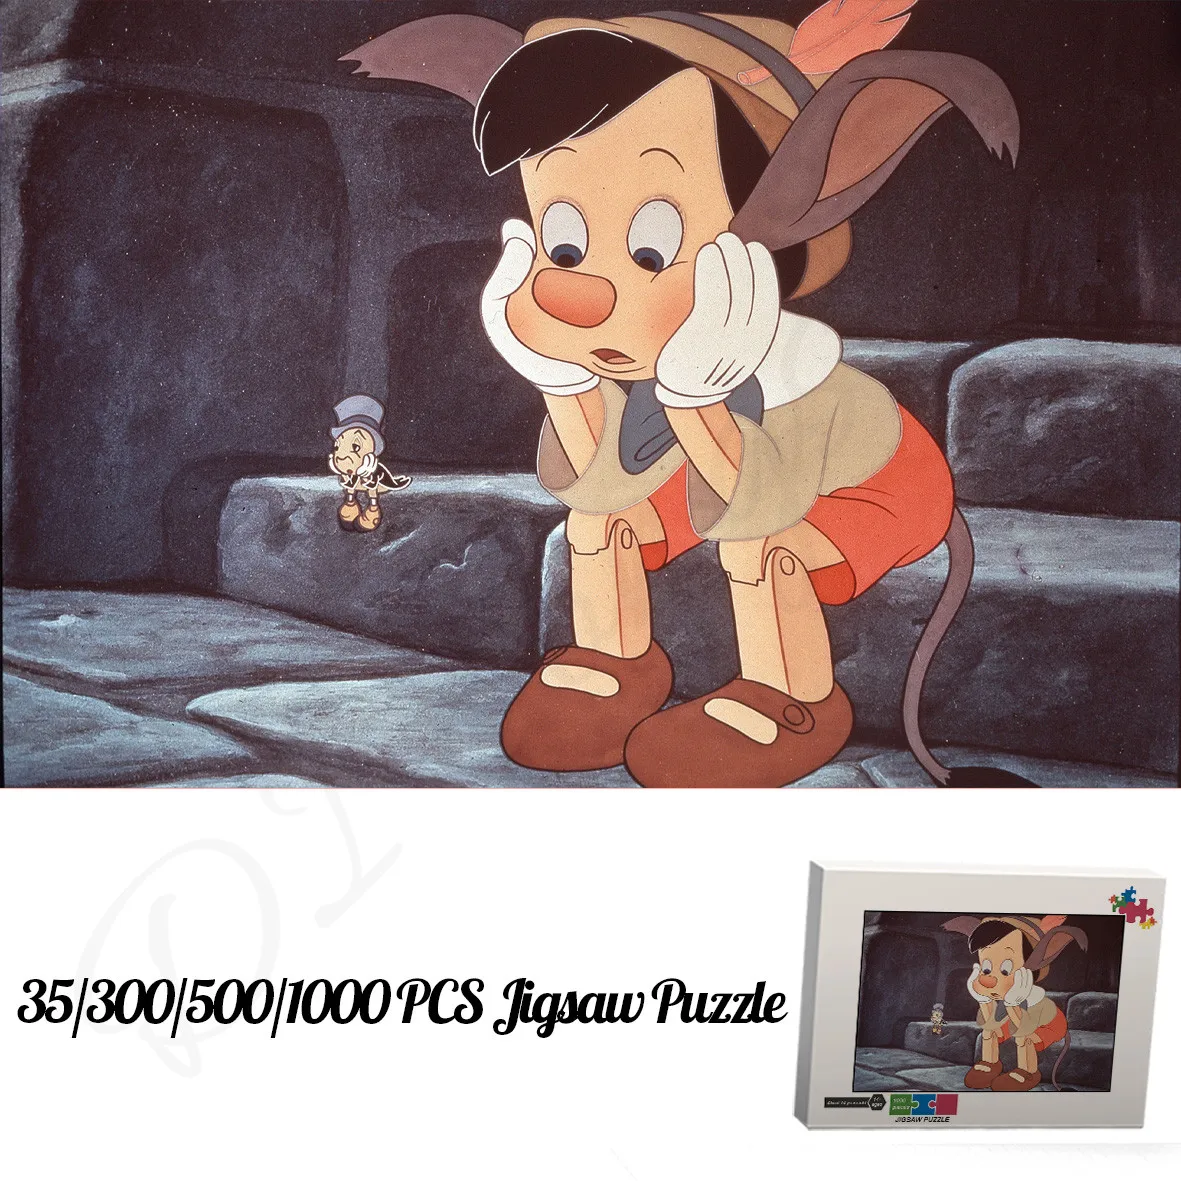 Disney Animated Film Pinocchio Puzzles Classic Cartoon Movie 35 300 500 1000 Pieces of Wooden Jigsaw Puzzles for Kids Unique Toy